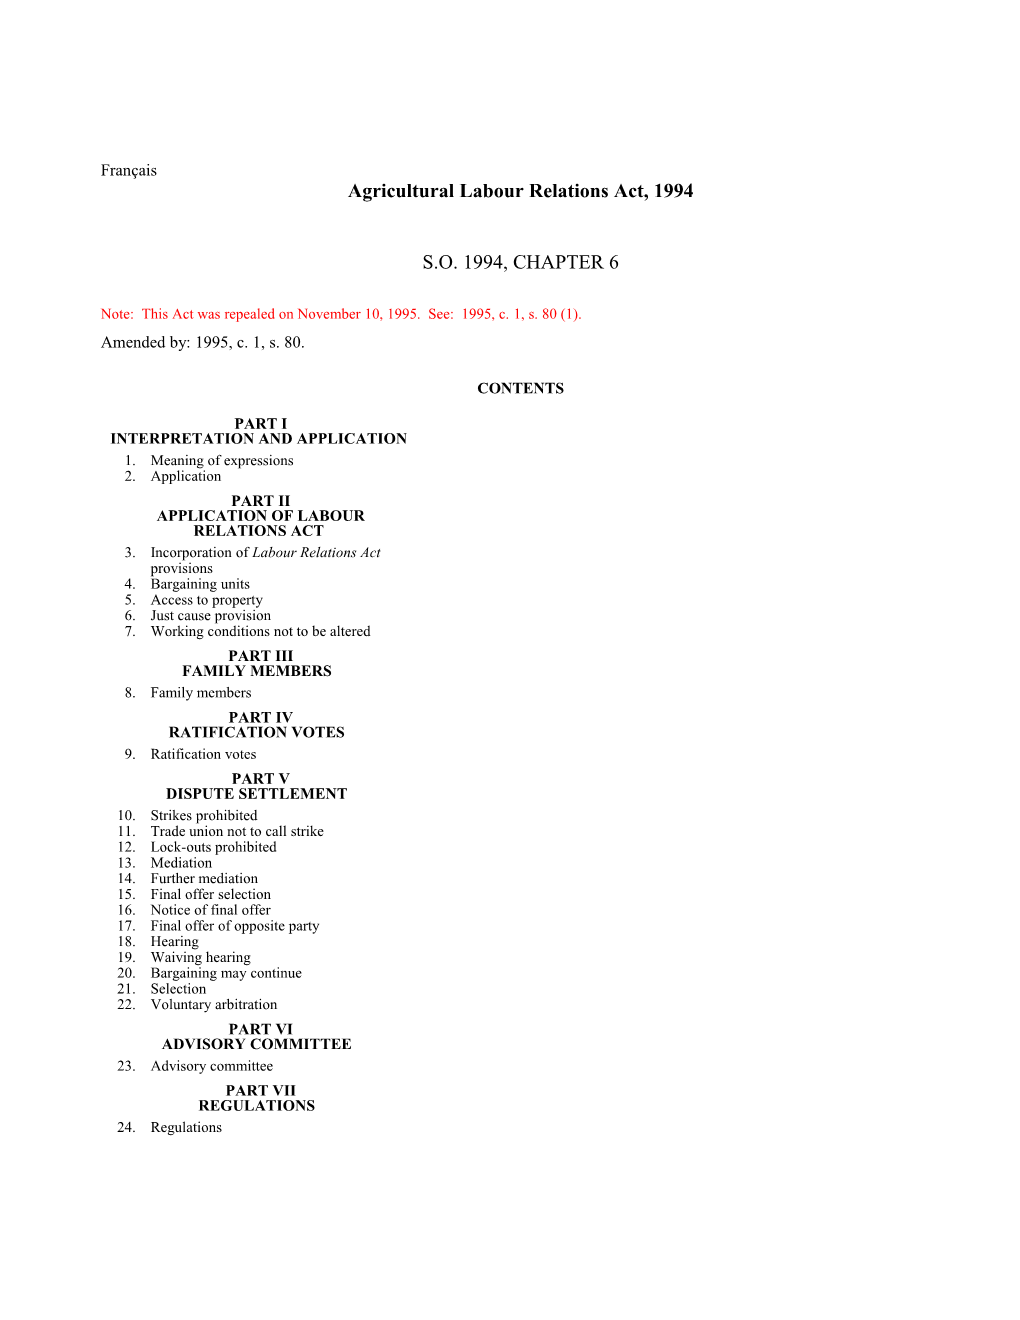 Agricultural Labour Relations Act, 1994, S.O. 1994, C. 6